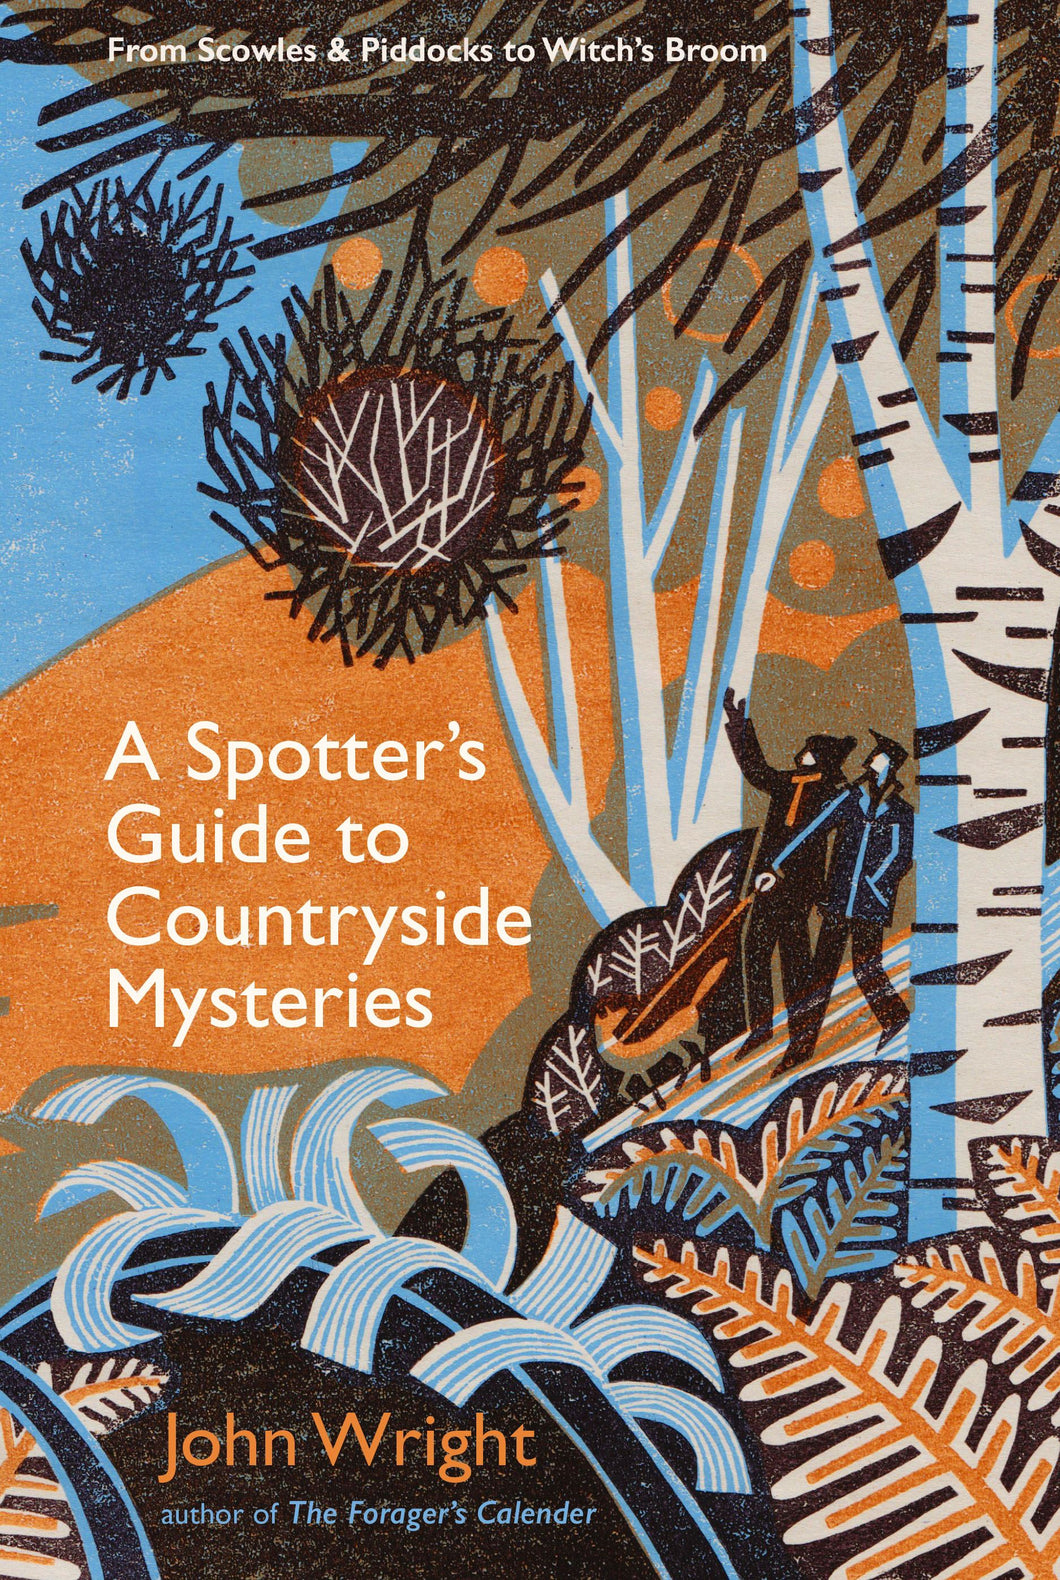 A Spotter's Guide to Countryside Mysteries by John Wright